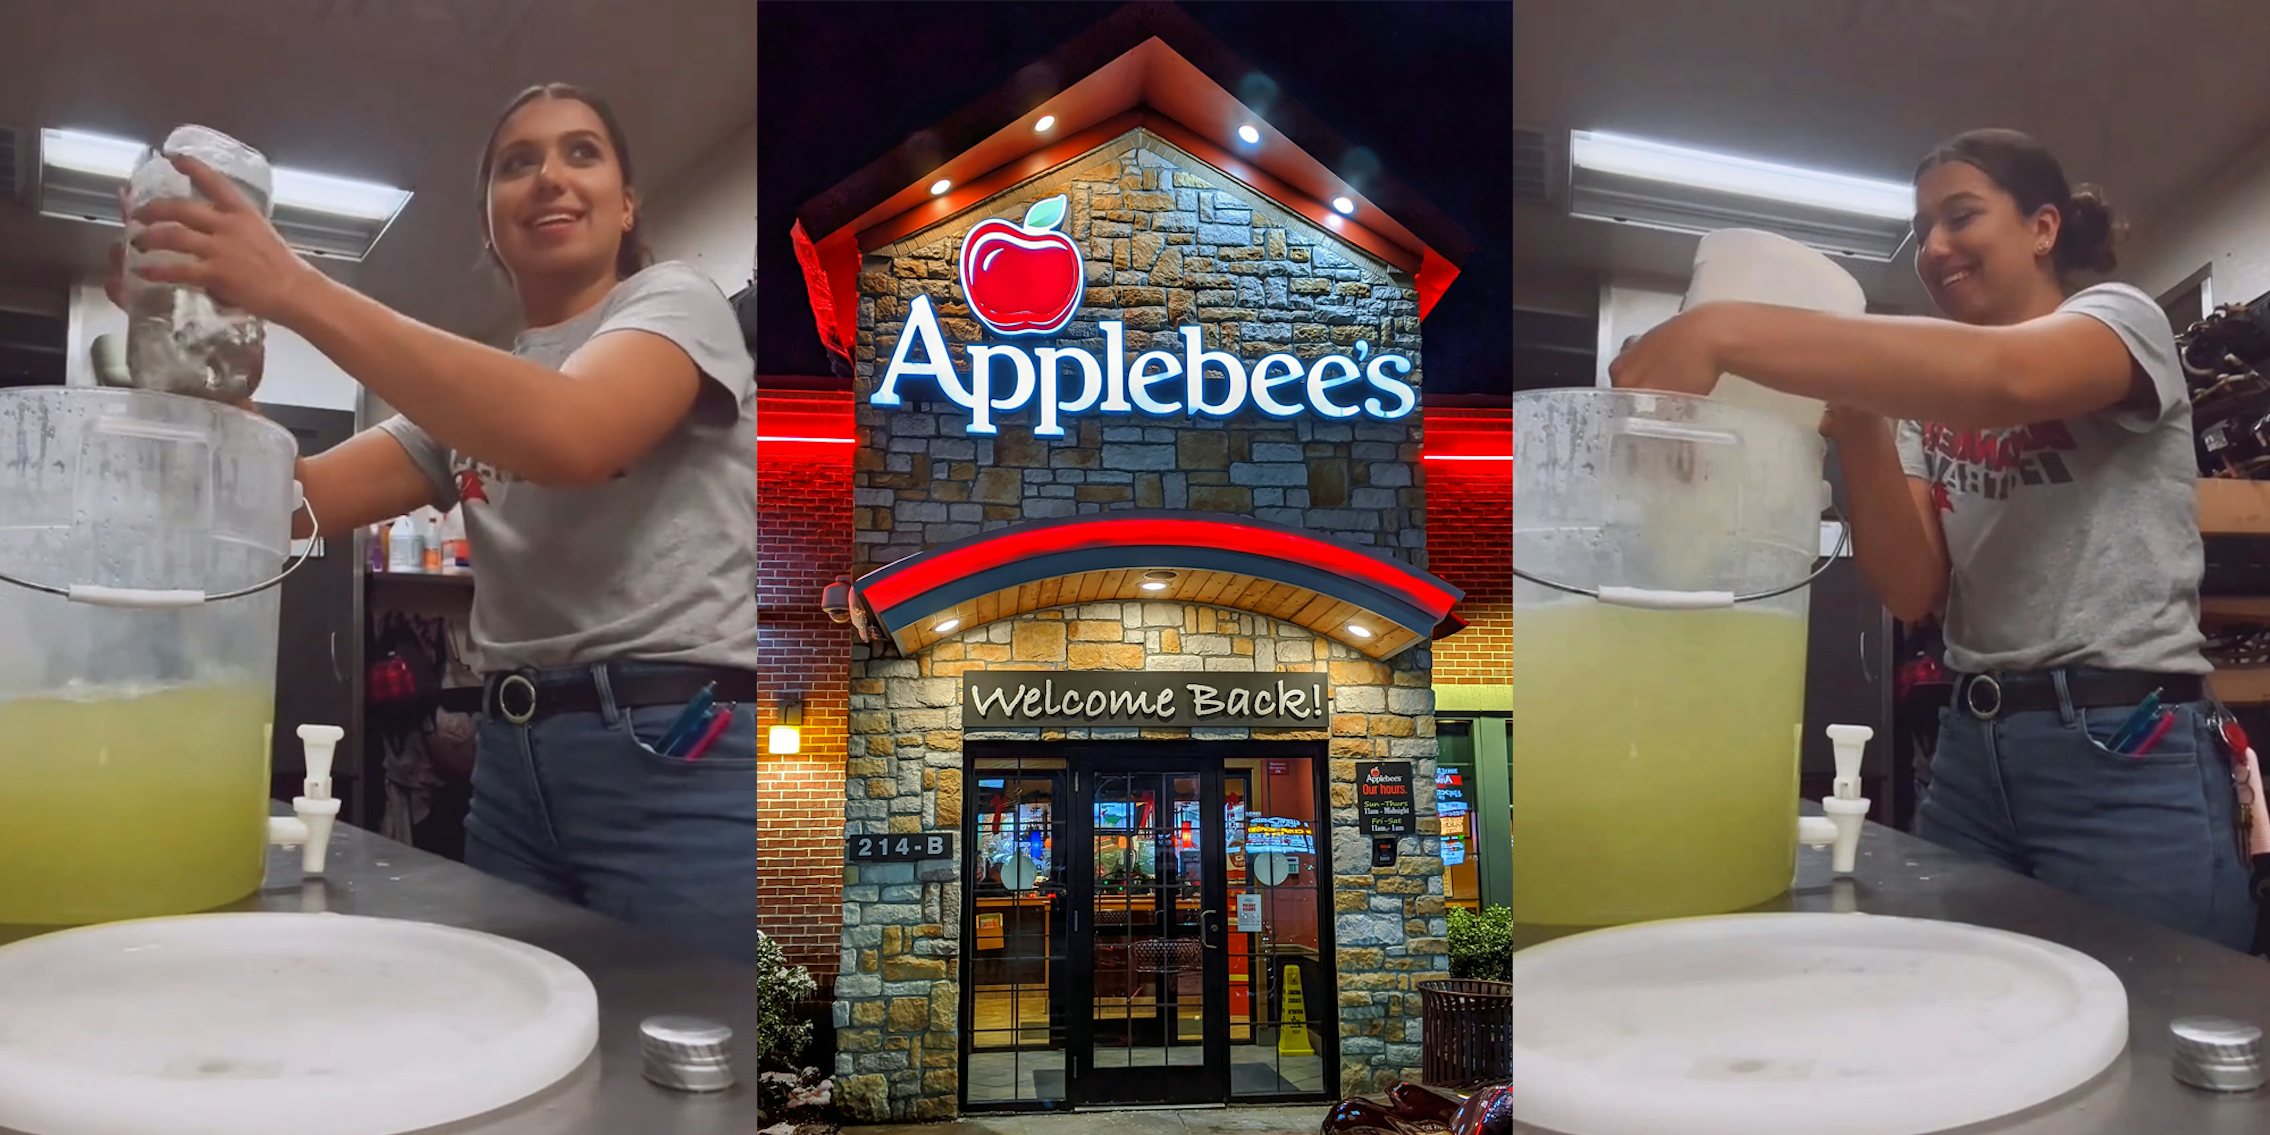 Applebee's worker pouring alcohol into large jug (l) Applebee's building entrance with sign at night (c) Applebee's worker dumping jug into larger jug (r)